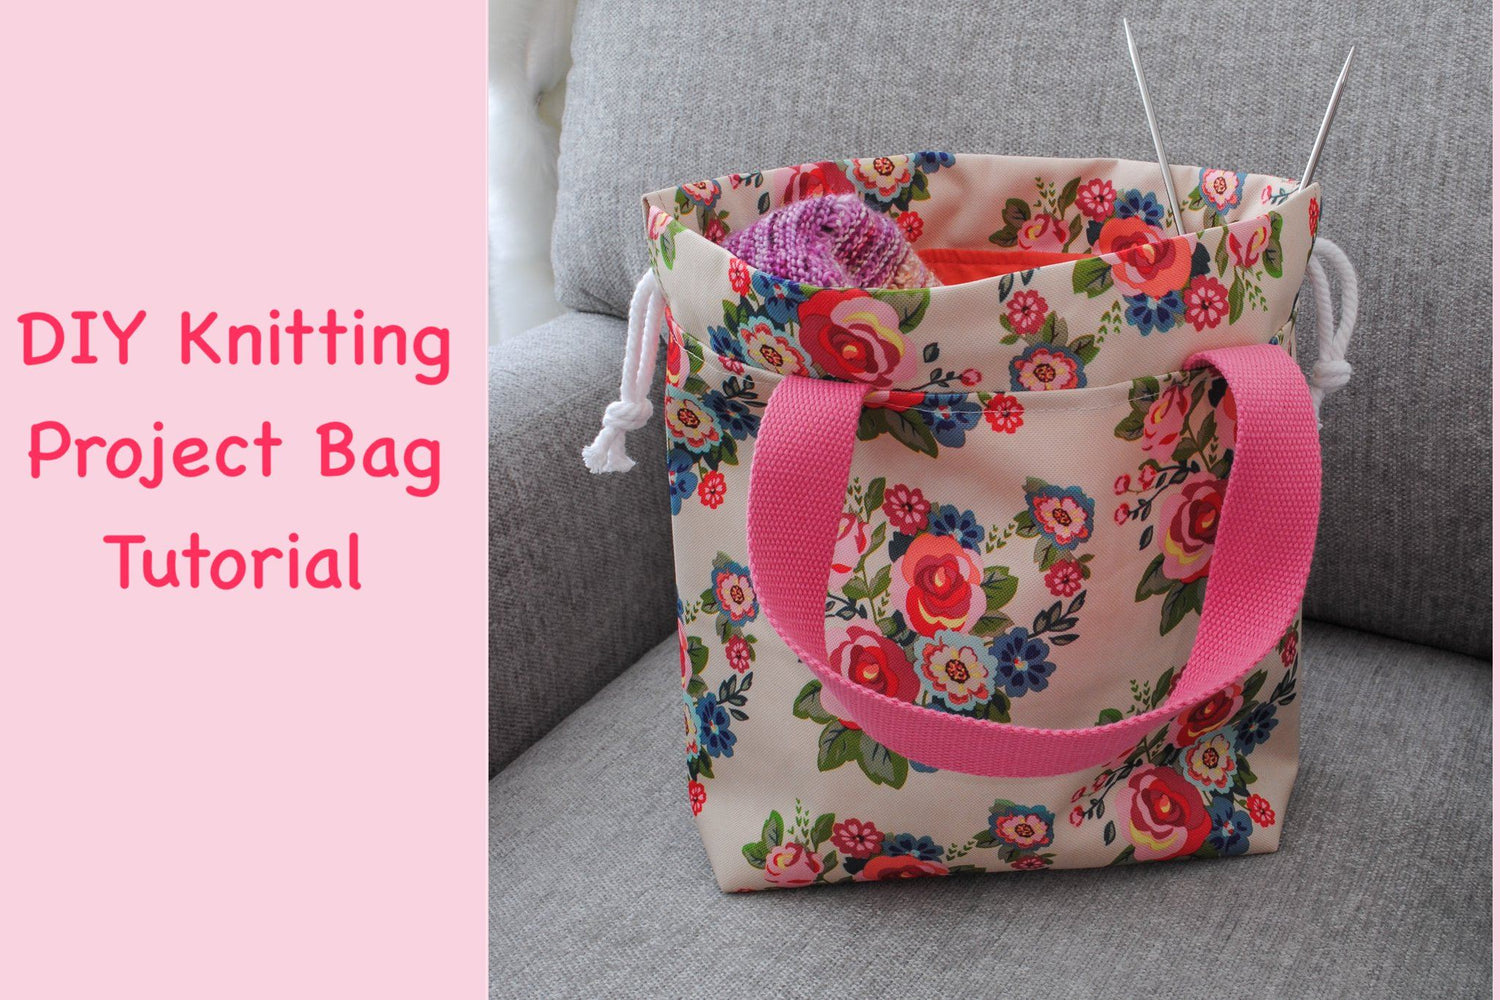 How to Sew a Yarn Project Bag - Free DIY Sewing Pattern